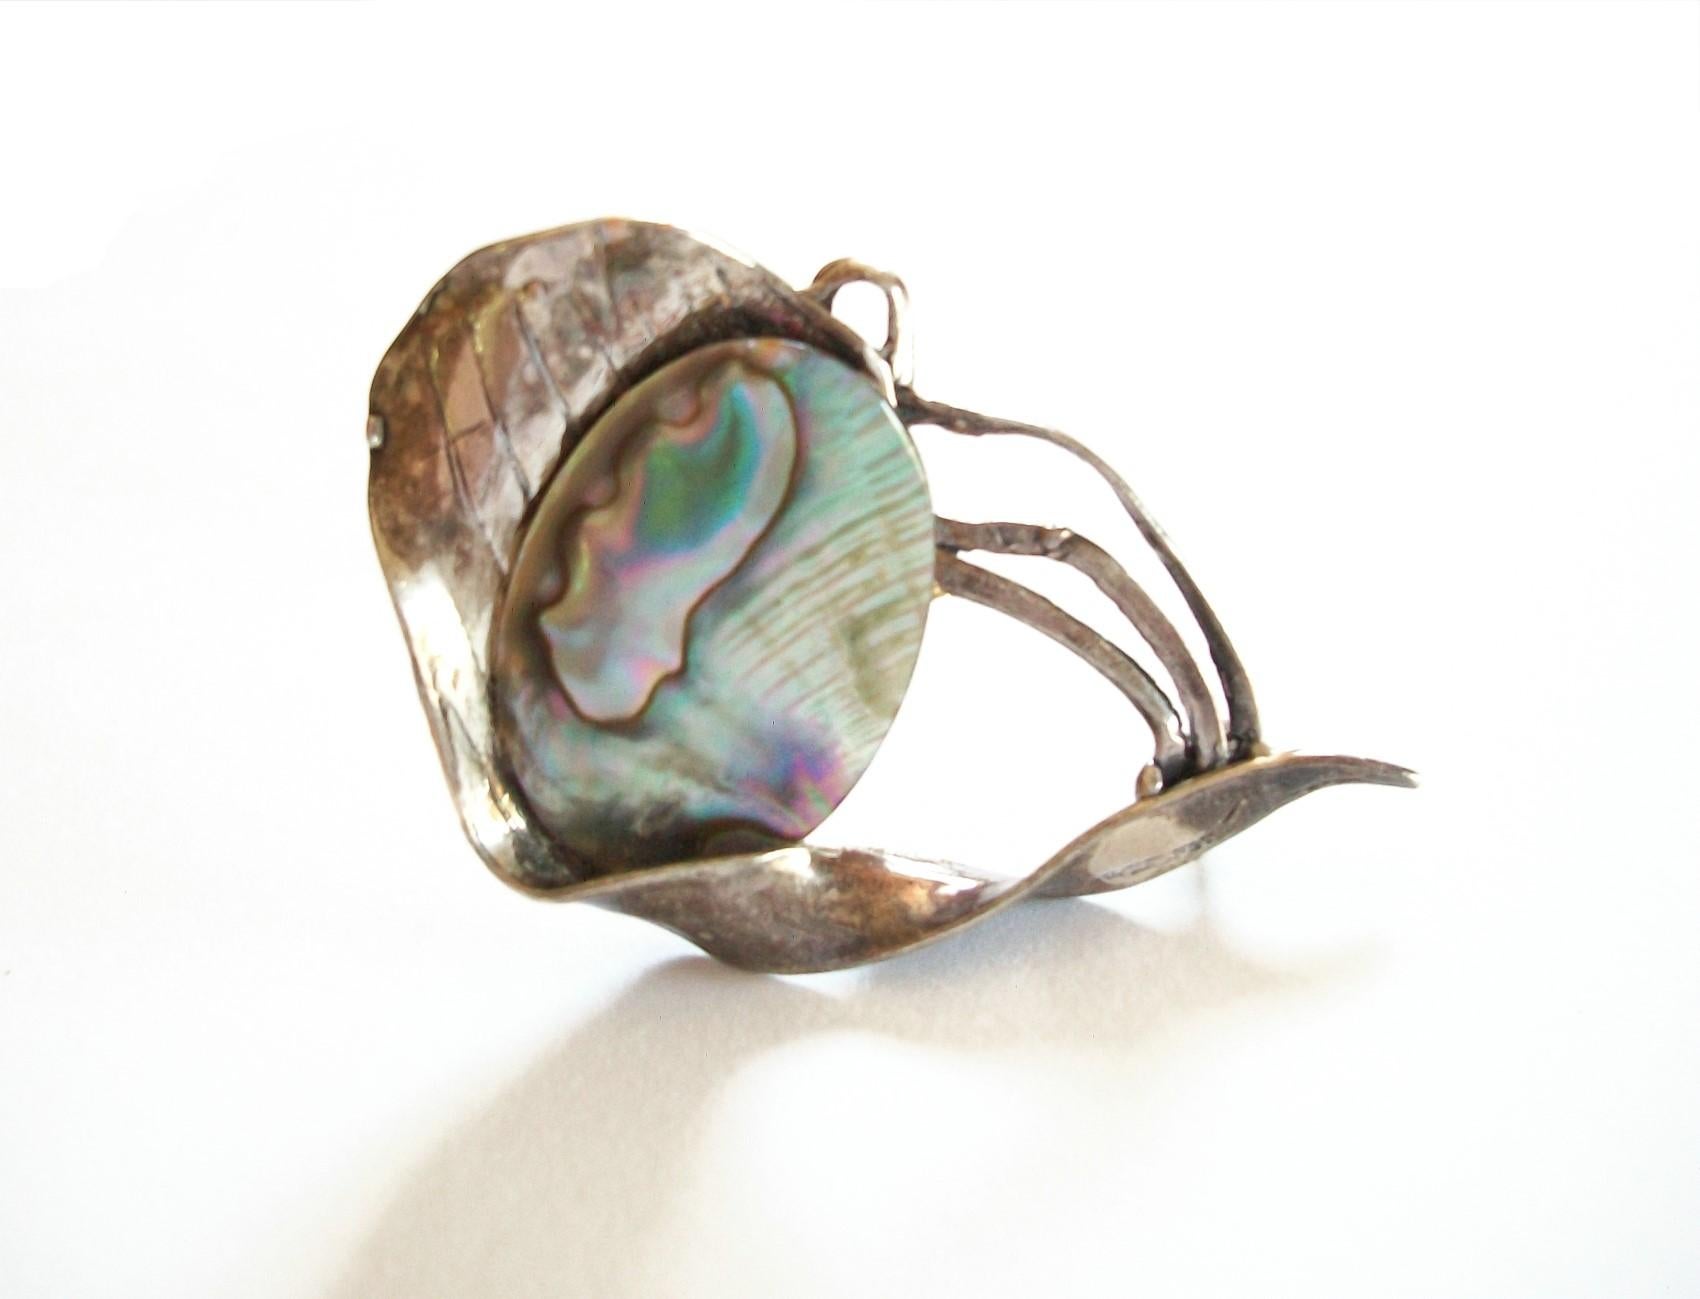 Modernist artisan sterling silver and abalone pin/brooch - very fluid, almost Art Nouveau feel - etched design to the silver outer band - unsigned - '925' to the back (as photographed) - Mexico - circa 1970's.

Excellent vintage condition - all